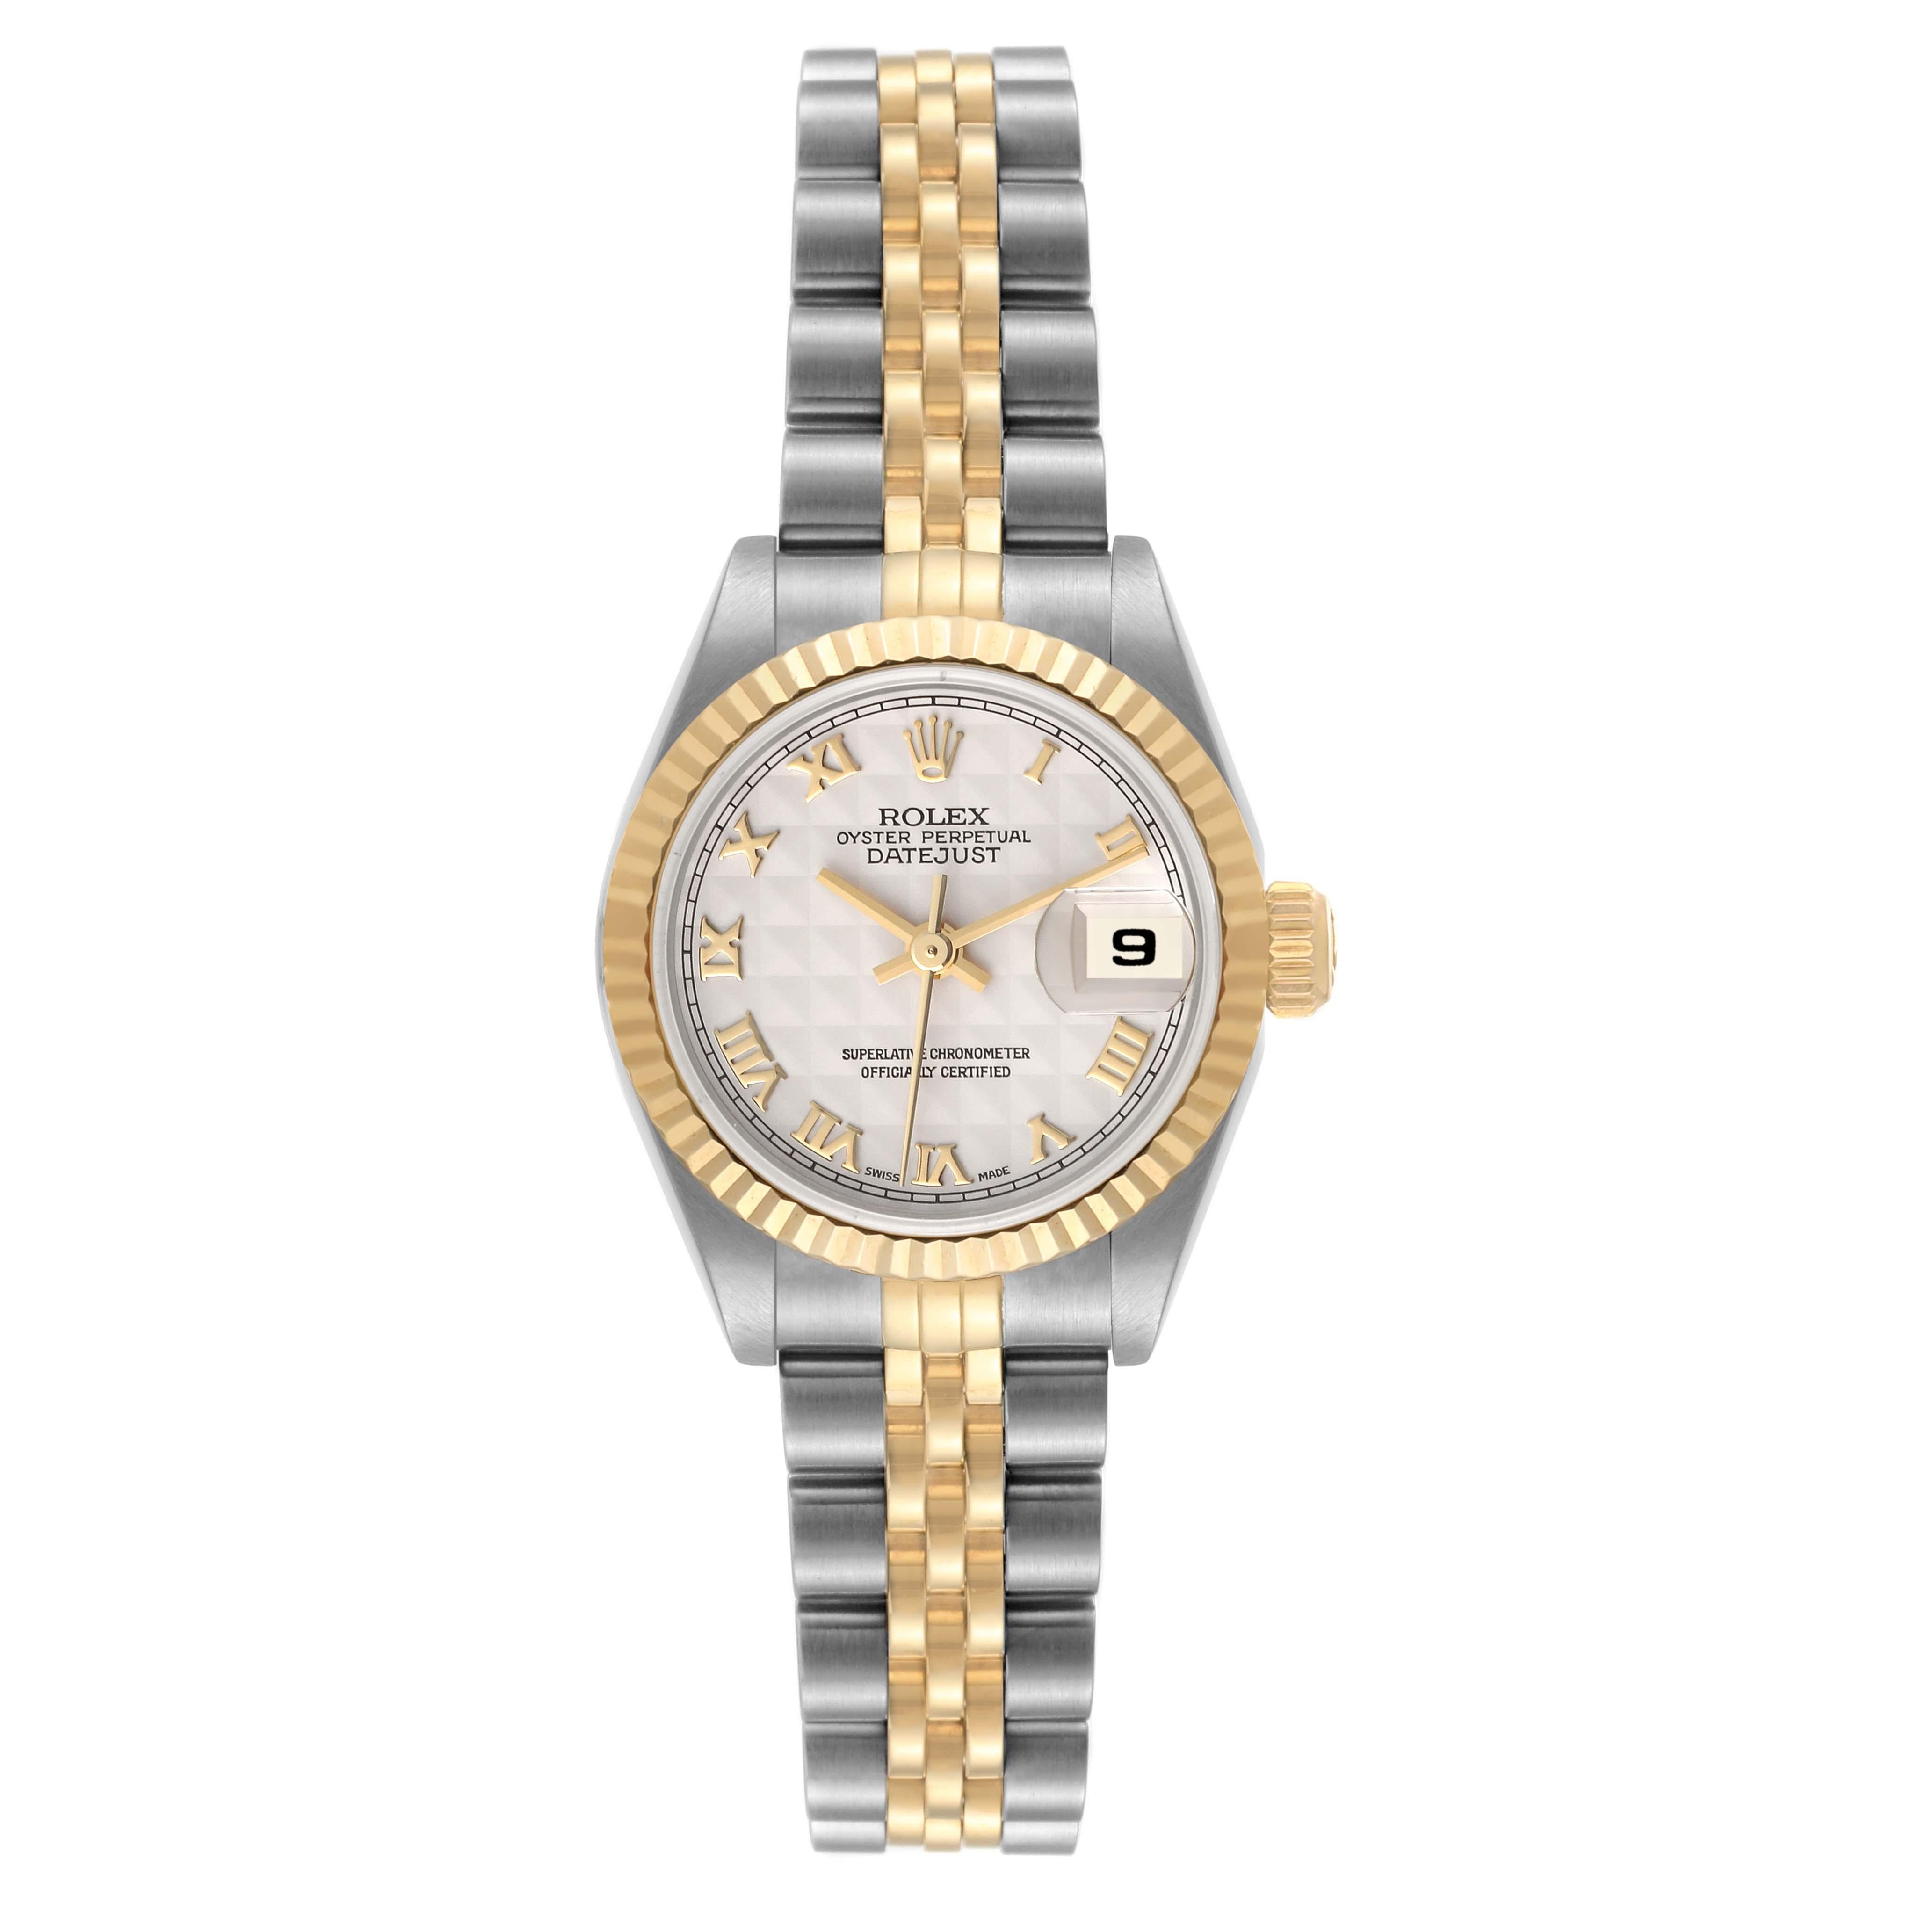 Rolex Datejust Steel Yellow Gold Ivory Pyramid Dial Ladies Watch 69173. Officially certified chronometer automatic self-winding movement. Stainless steel oyster case 26 mm in diameter. Rolex logo on the crown. 18k yellow gold fluted bezel. Scratch